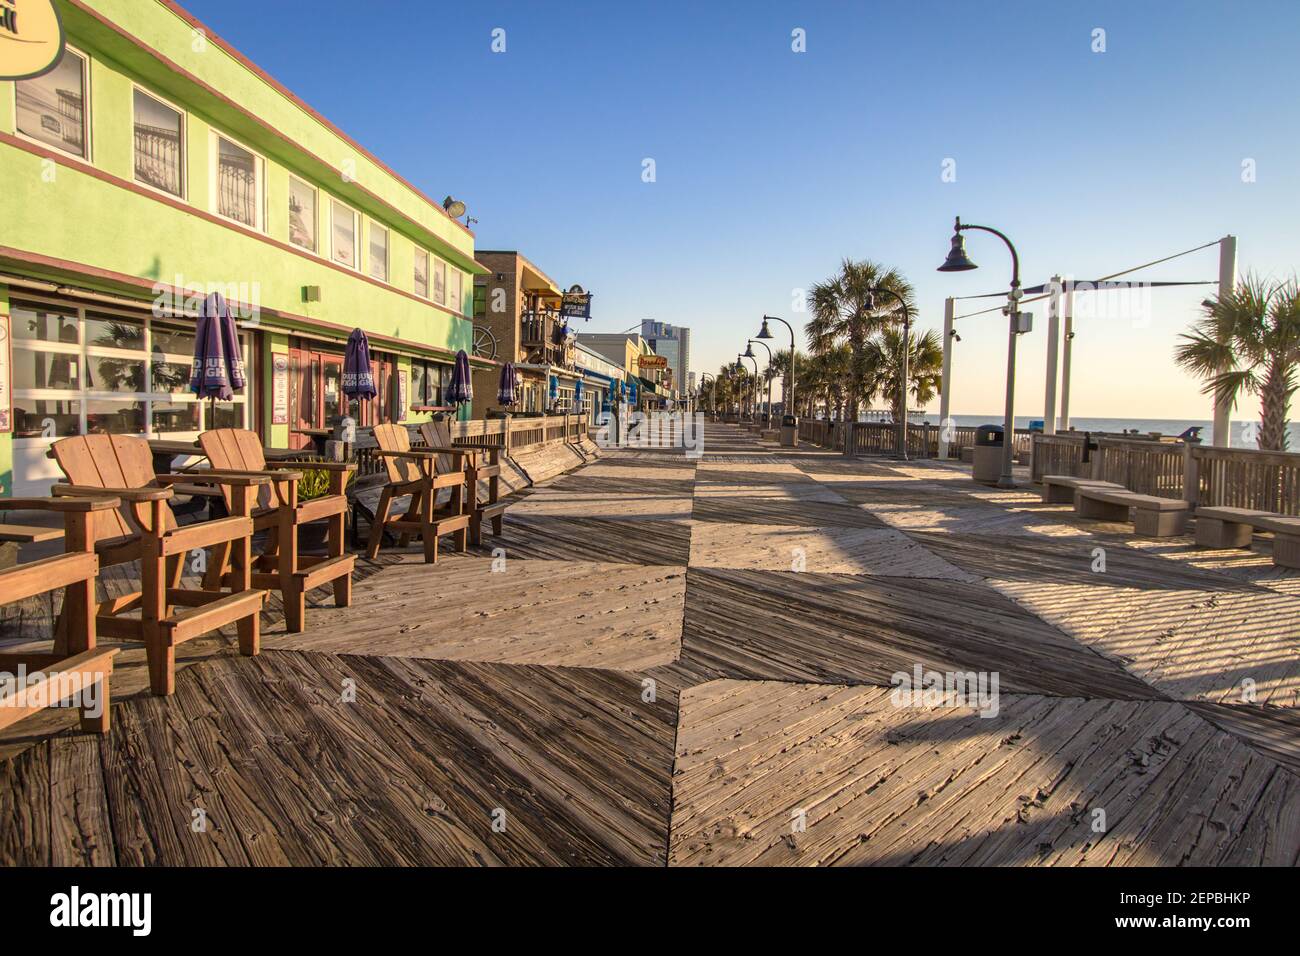 Mrytle Beach, South Carolina, USA - February 25, 2021: View of the Myrtle Beach Boardwalk with empty outdoor dining areas set up for patrons. Stock Photo